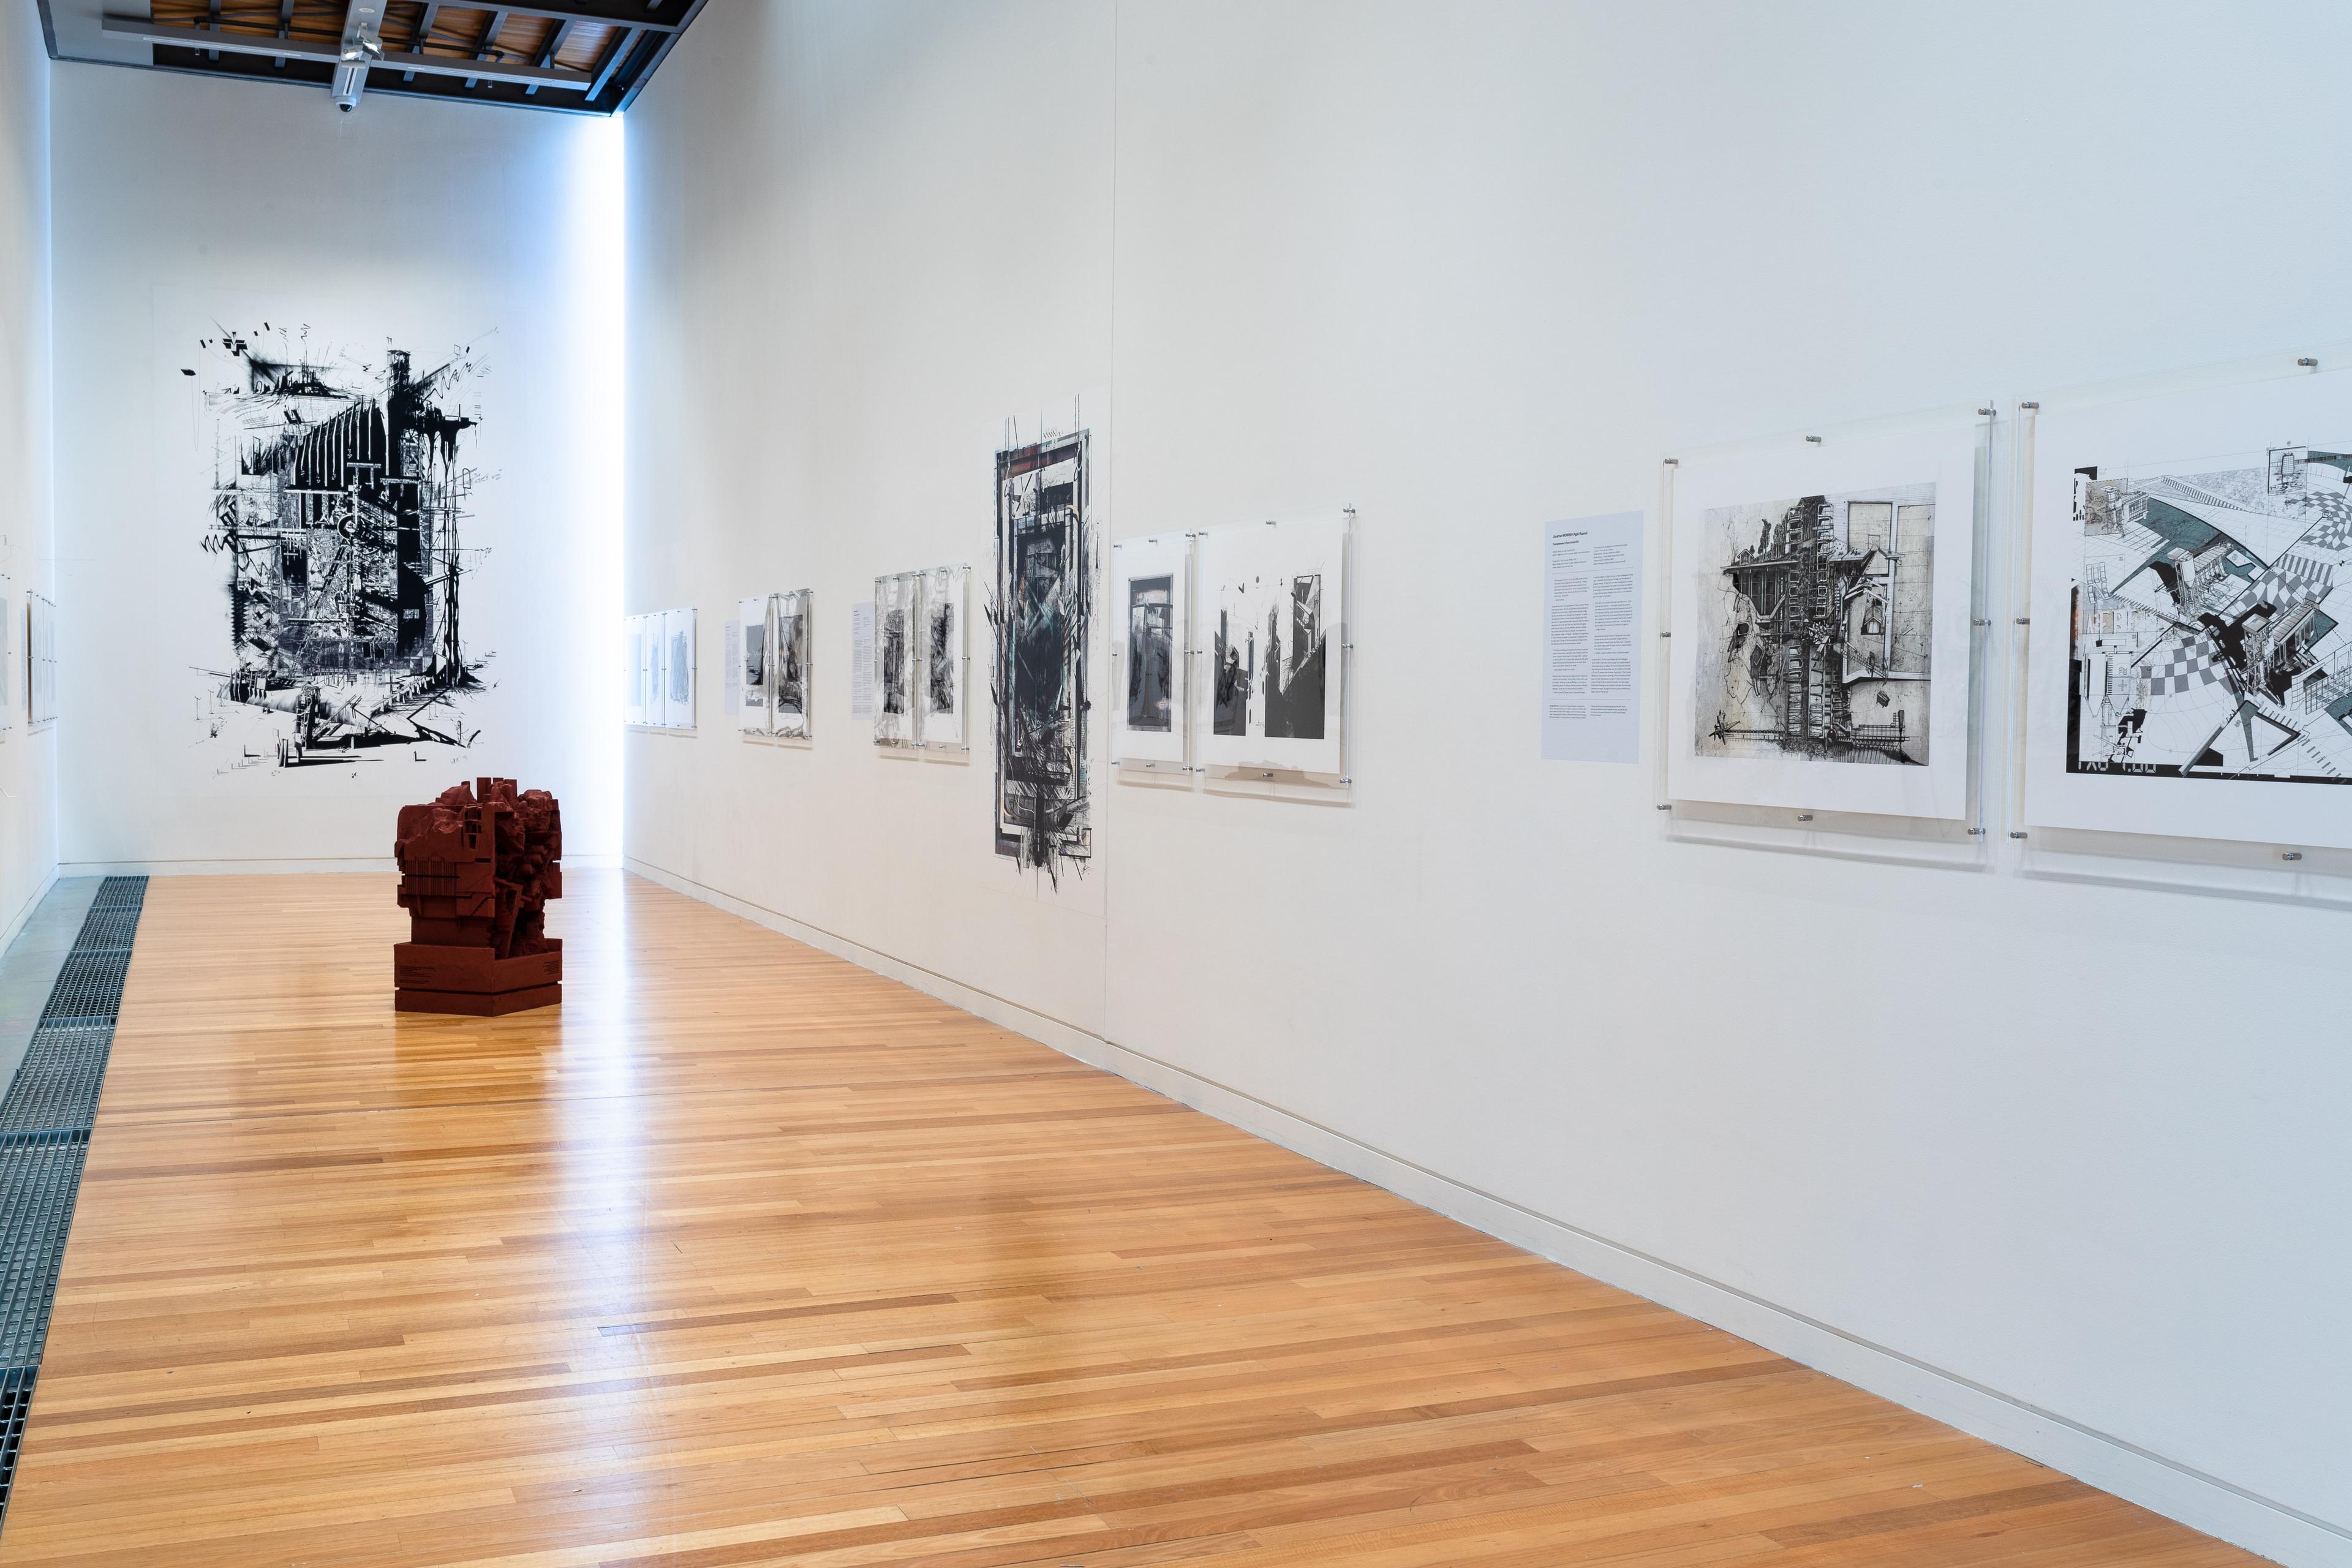 Wide view of a gallery with text and artworks on the white walls and a dark red sculpture on the wooden floor. Daniel K. Brown 